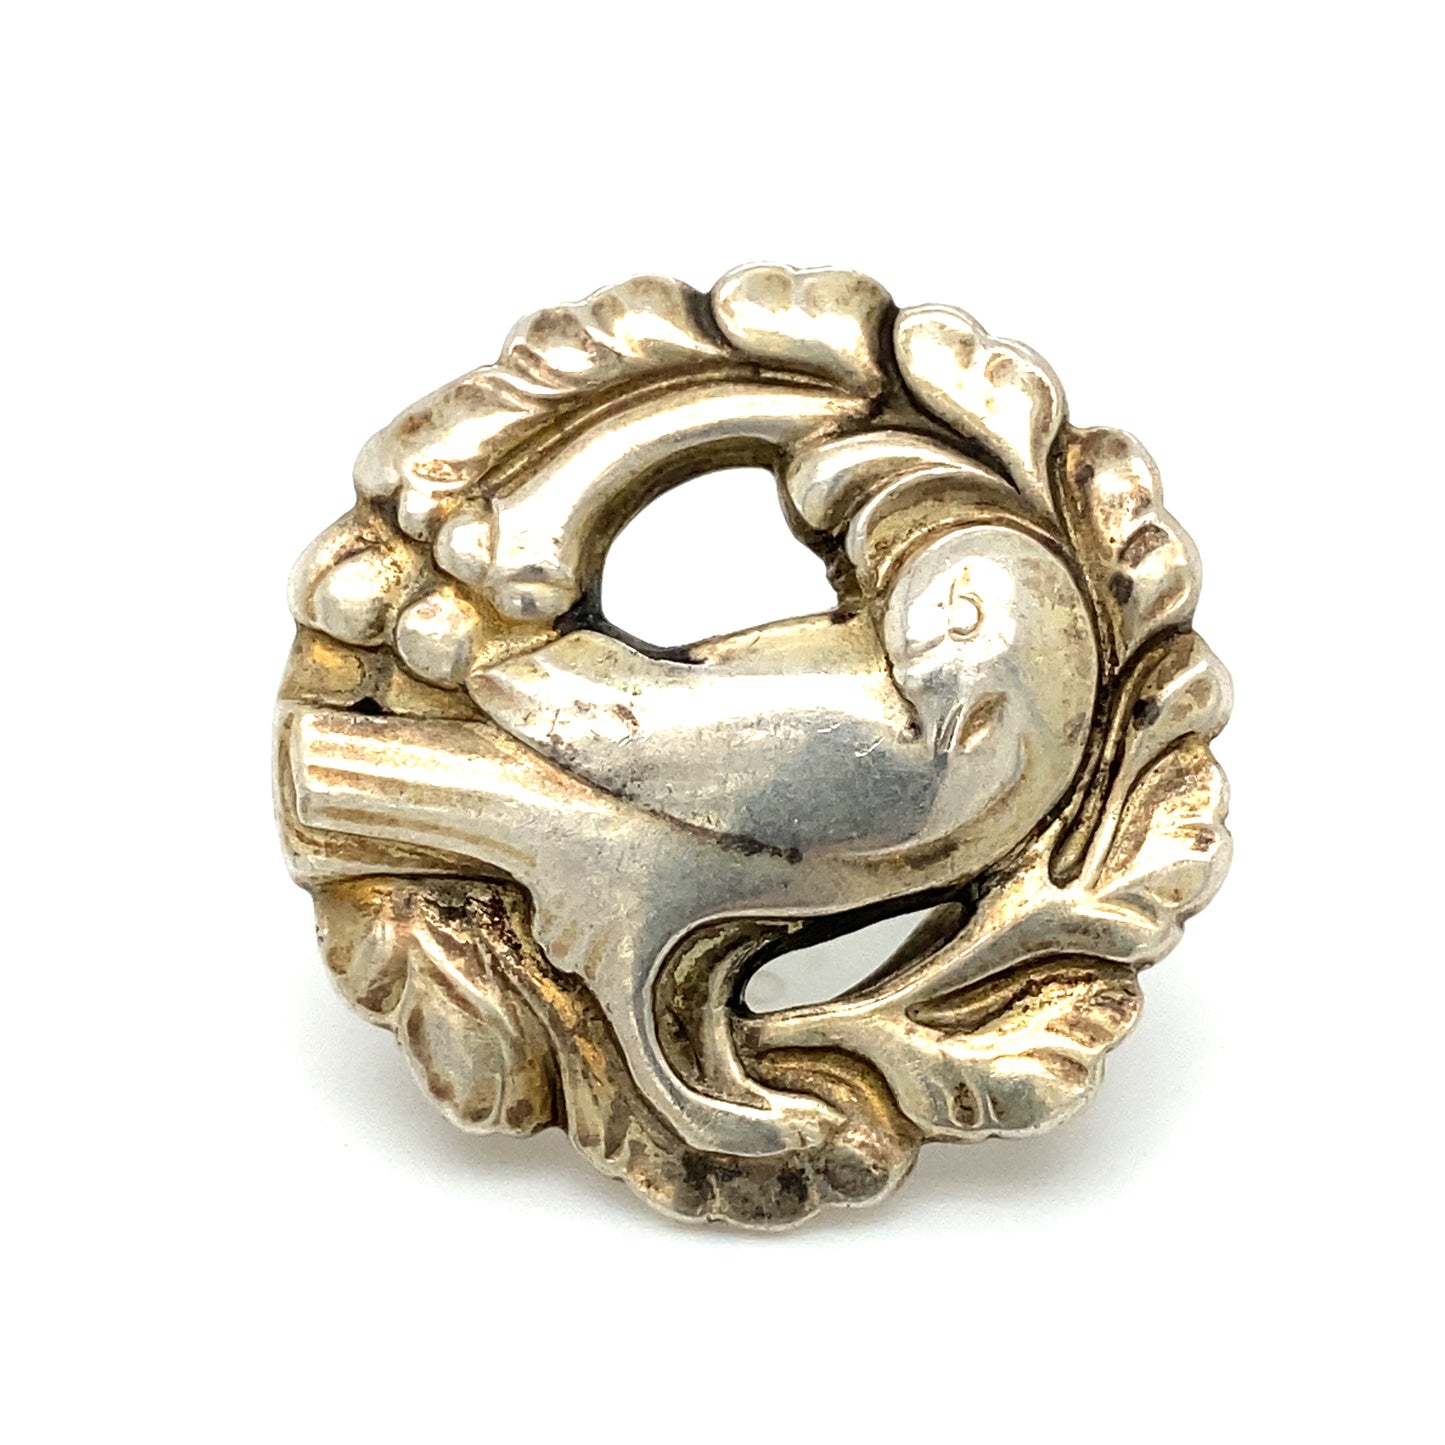 Circa 1960s Danish Bird Cocktail Ring in Sterling Silver